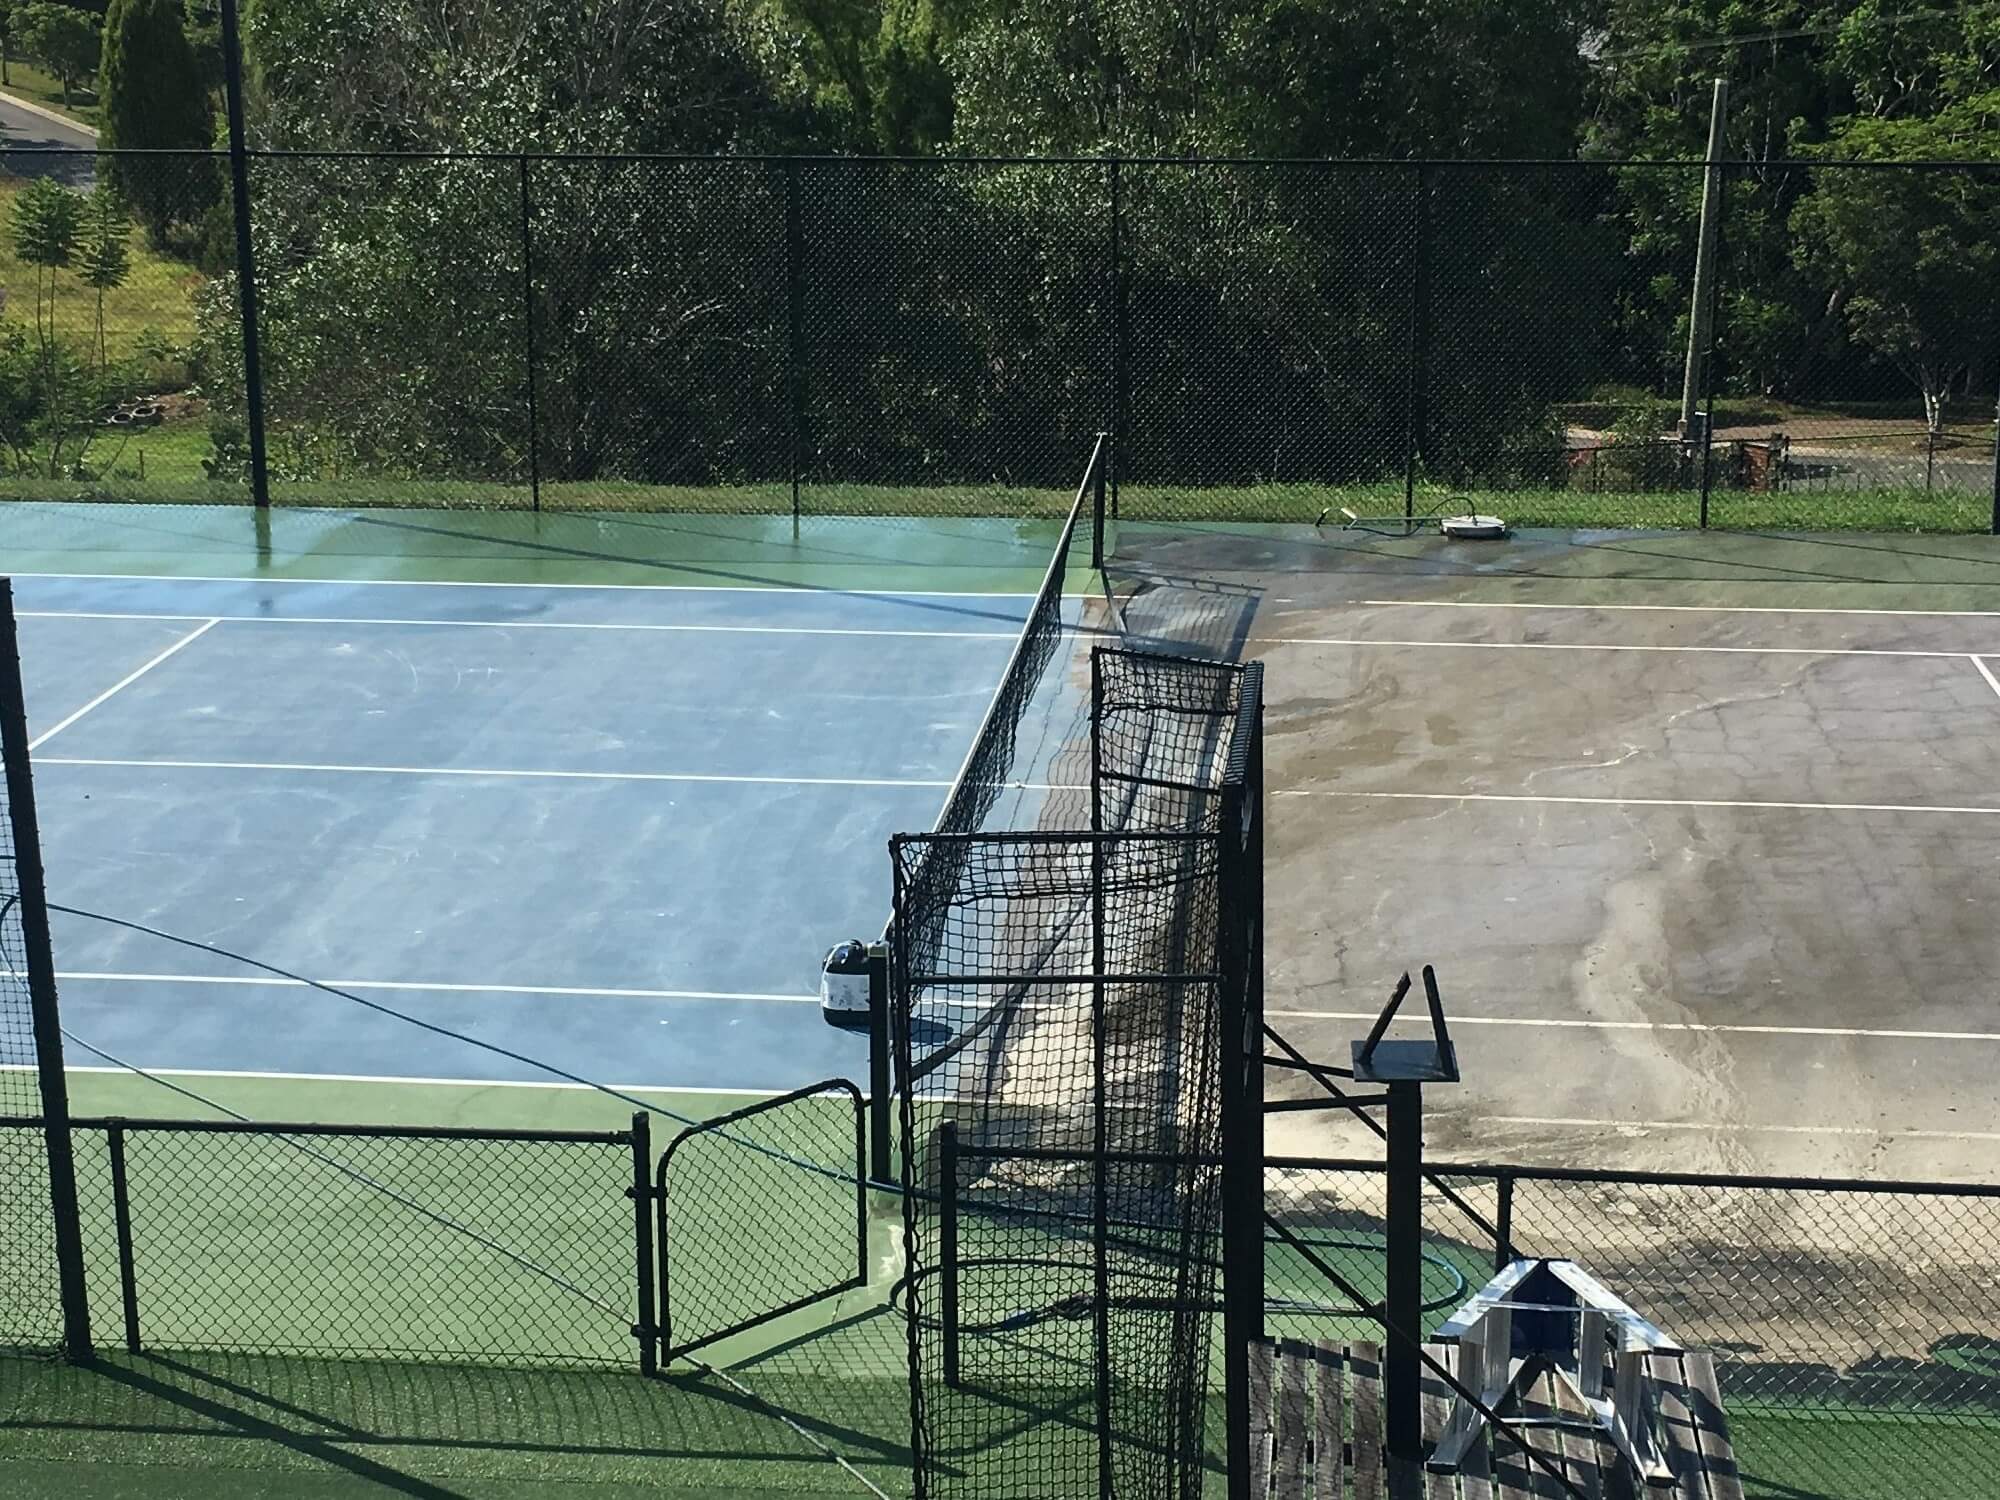 Tennis court cleaning in progress